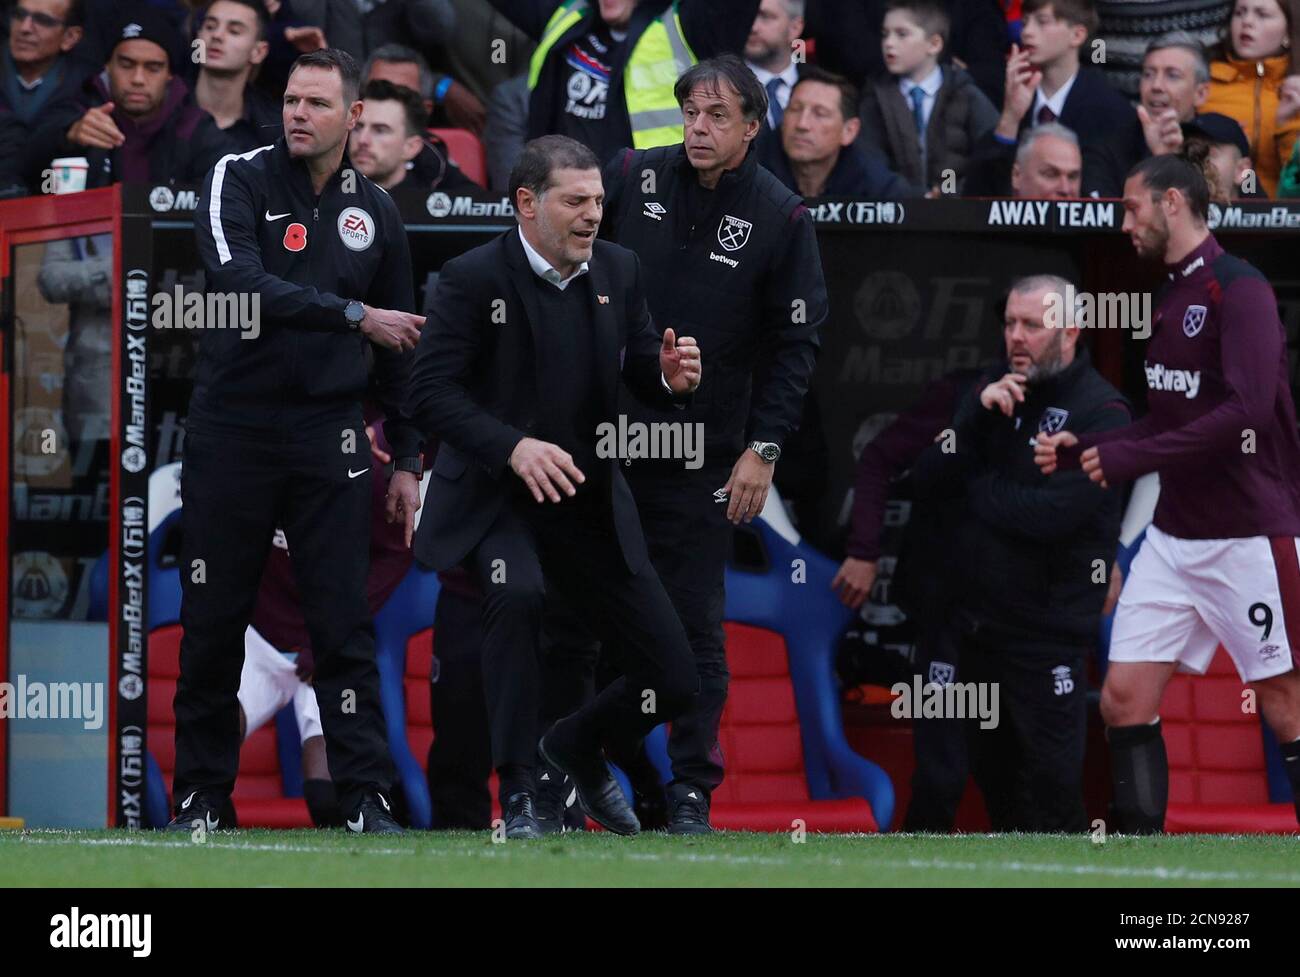 Soccer Football - Premier League - Crystal Palace vs West Ham United - Selhurst Park, London, Britain - October 28, 2017   West Ham United manager Slaven Bilic looks dejected as Crystal Palace celebrate their second goal   REUTERS/Eddie Keogh    EDITORIAL USE ONLY. No use with unauthorized audio, video, data, fixture lists, club/league logos or 'live' services. Online in-match use limited to 75 images, no video emulation. No use in betting, games or single club/league/player publications. Please contact your account representative for further details.? Stock Photo